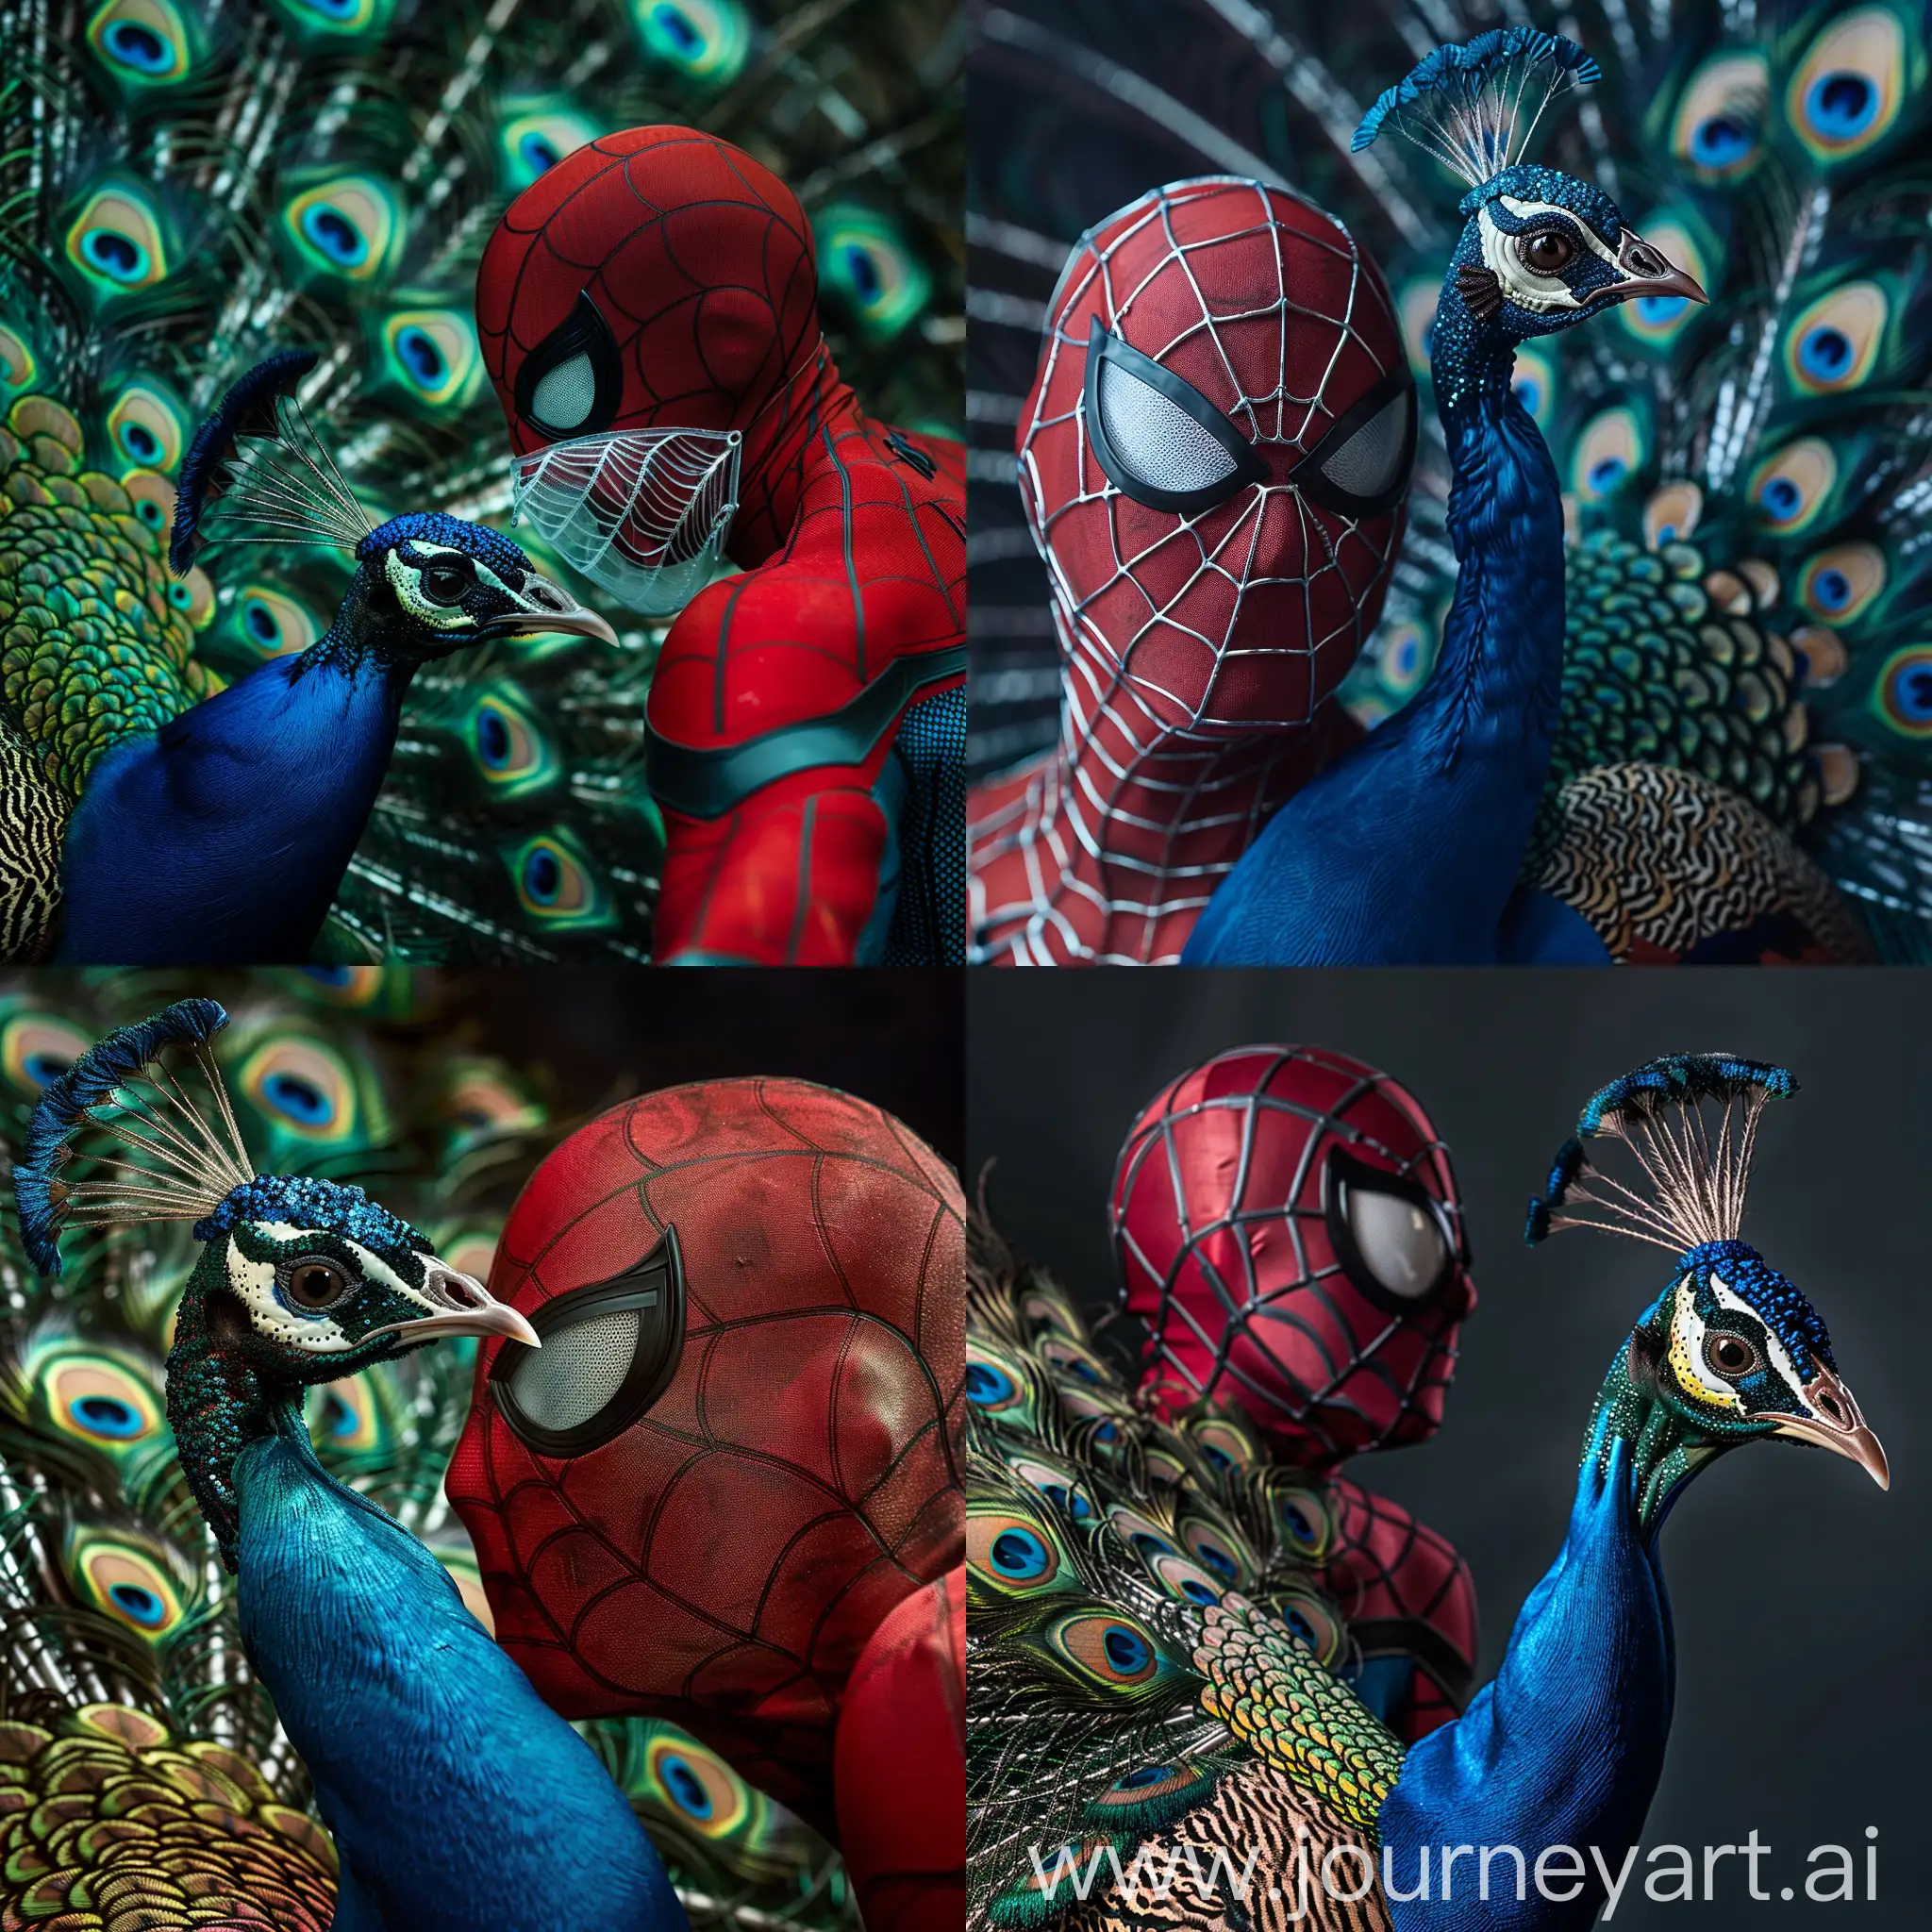 SpidermanPeacock-Hybrid-in-Closeup-with-Transparent-Mask